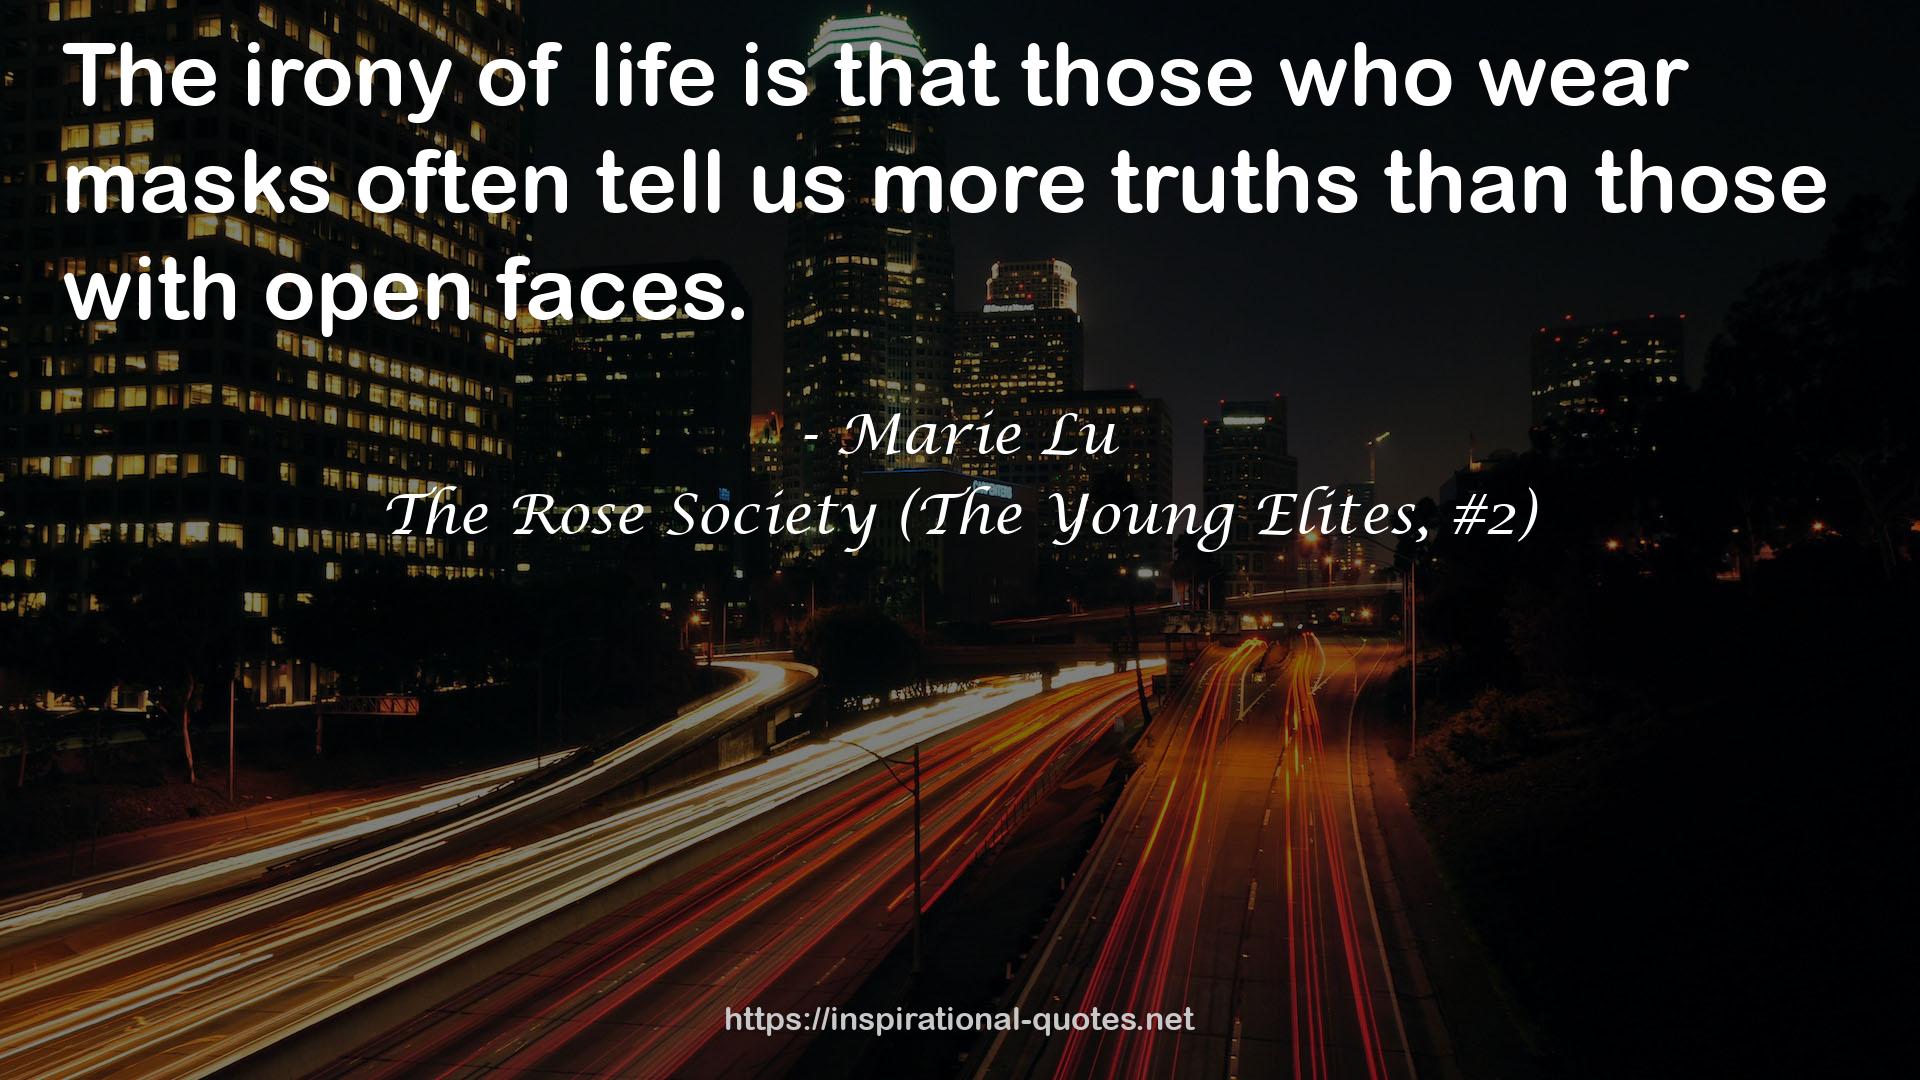 The Rose Society (The Young Elites, #2) QUOTES